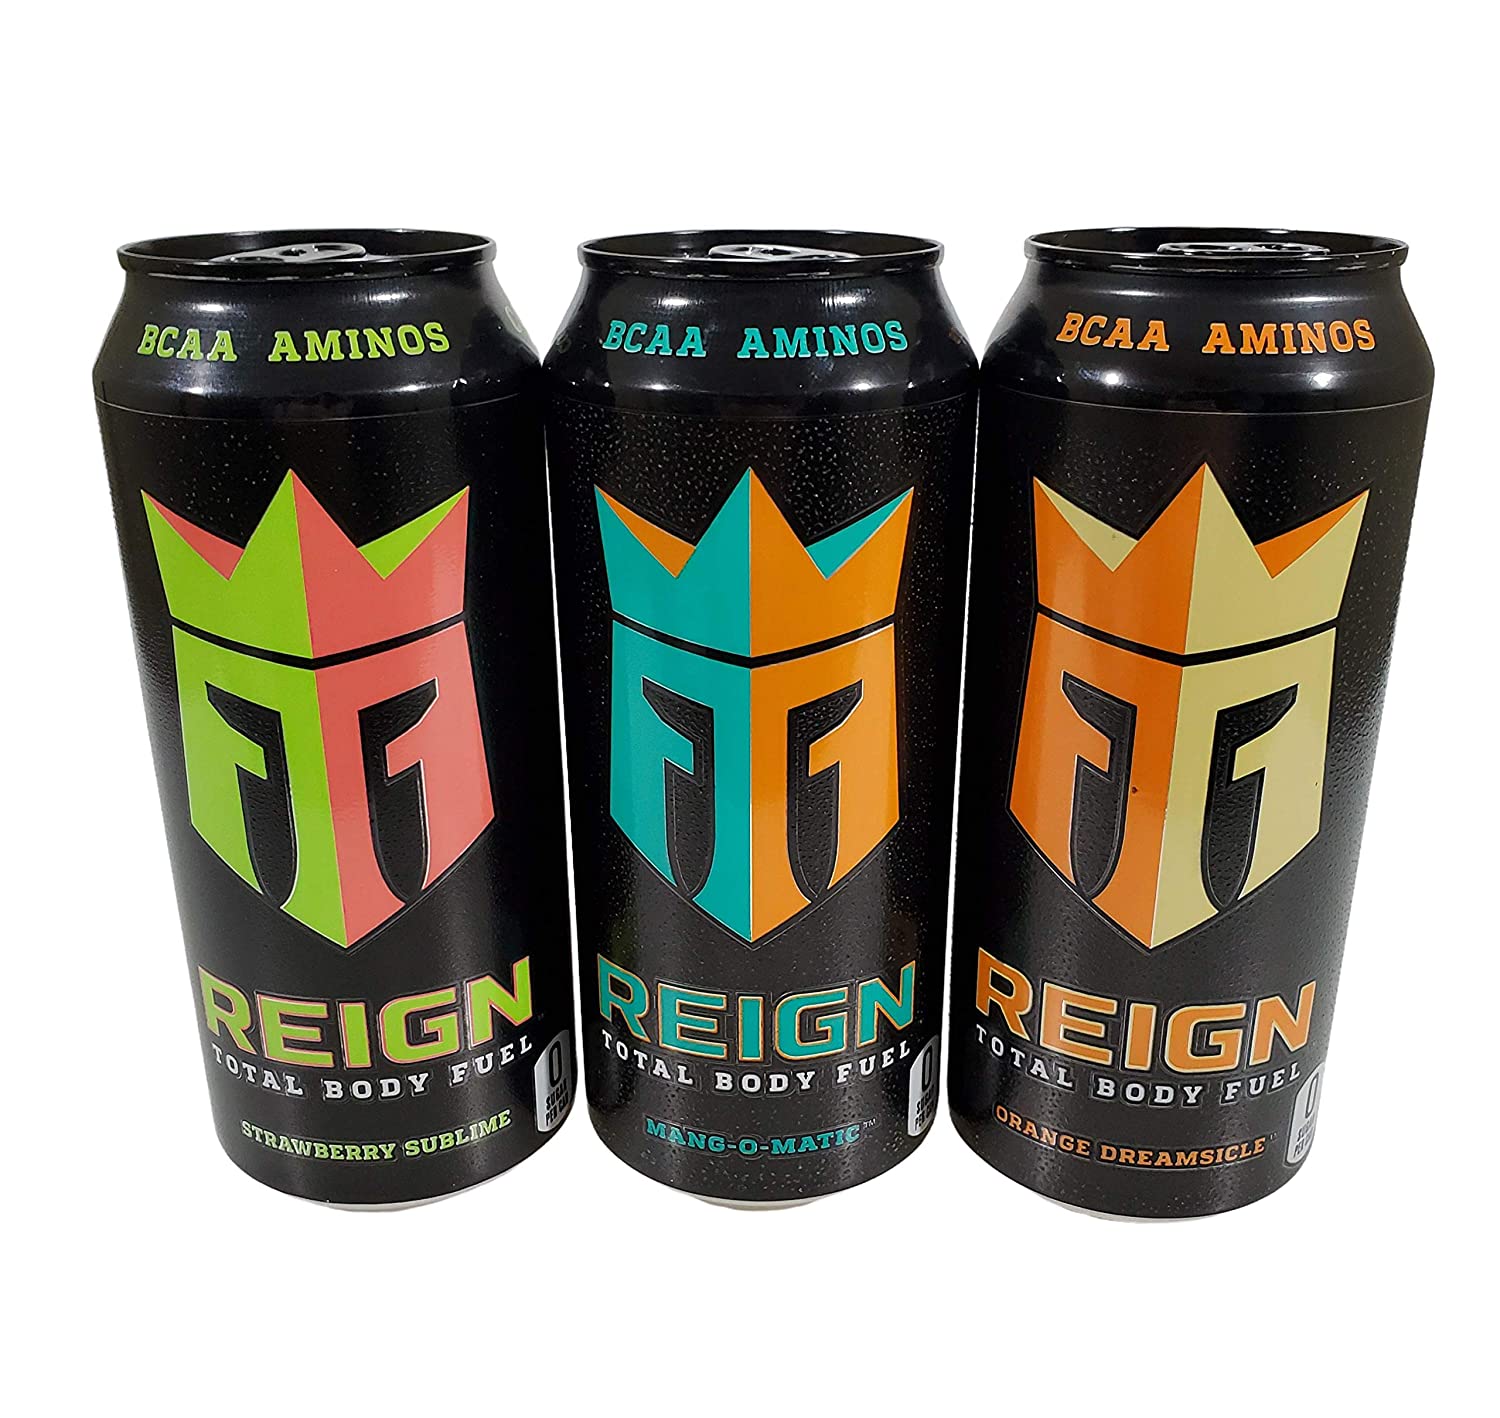 Reign Total Body Fuel Energy Drink